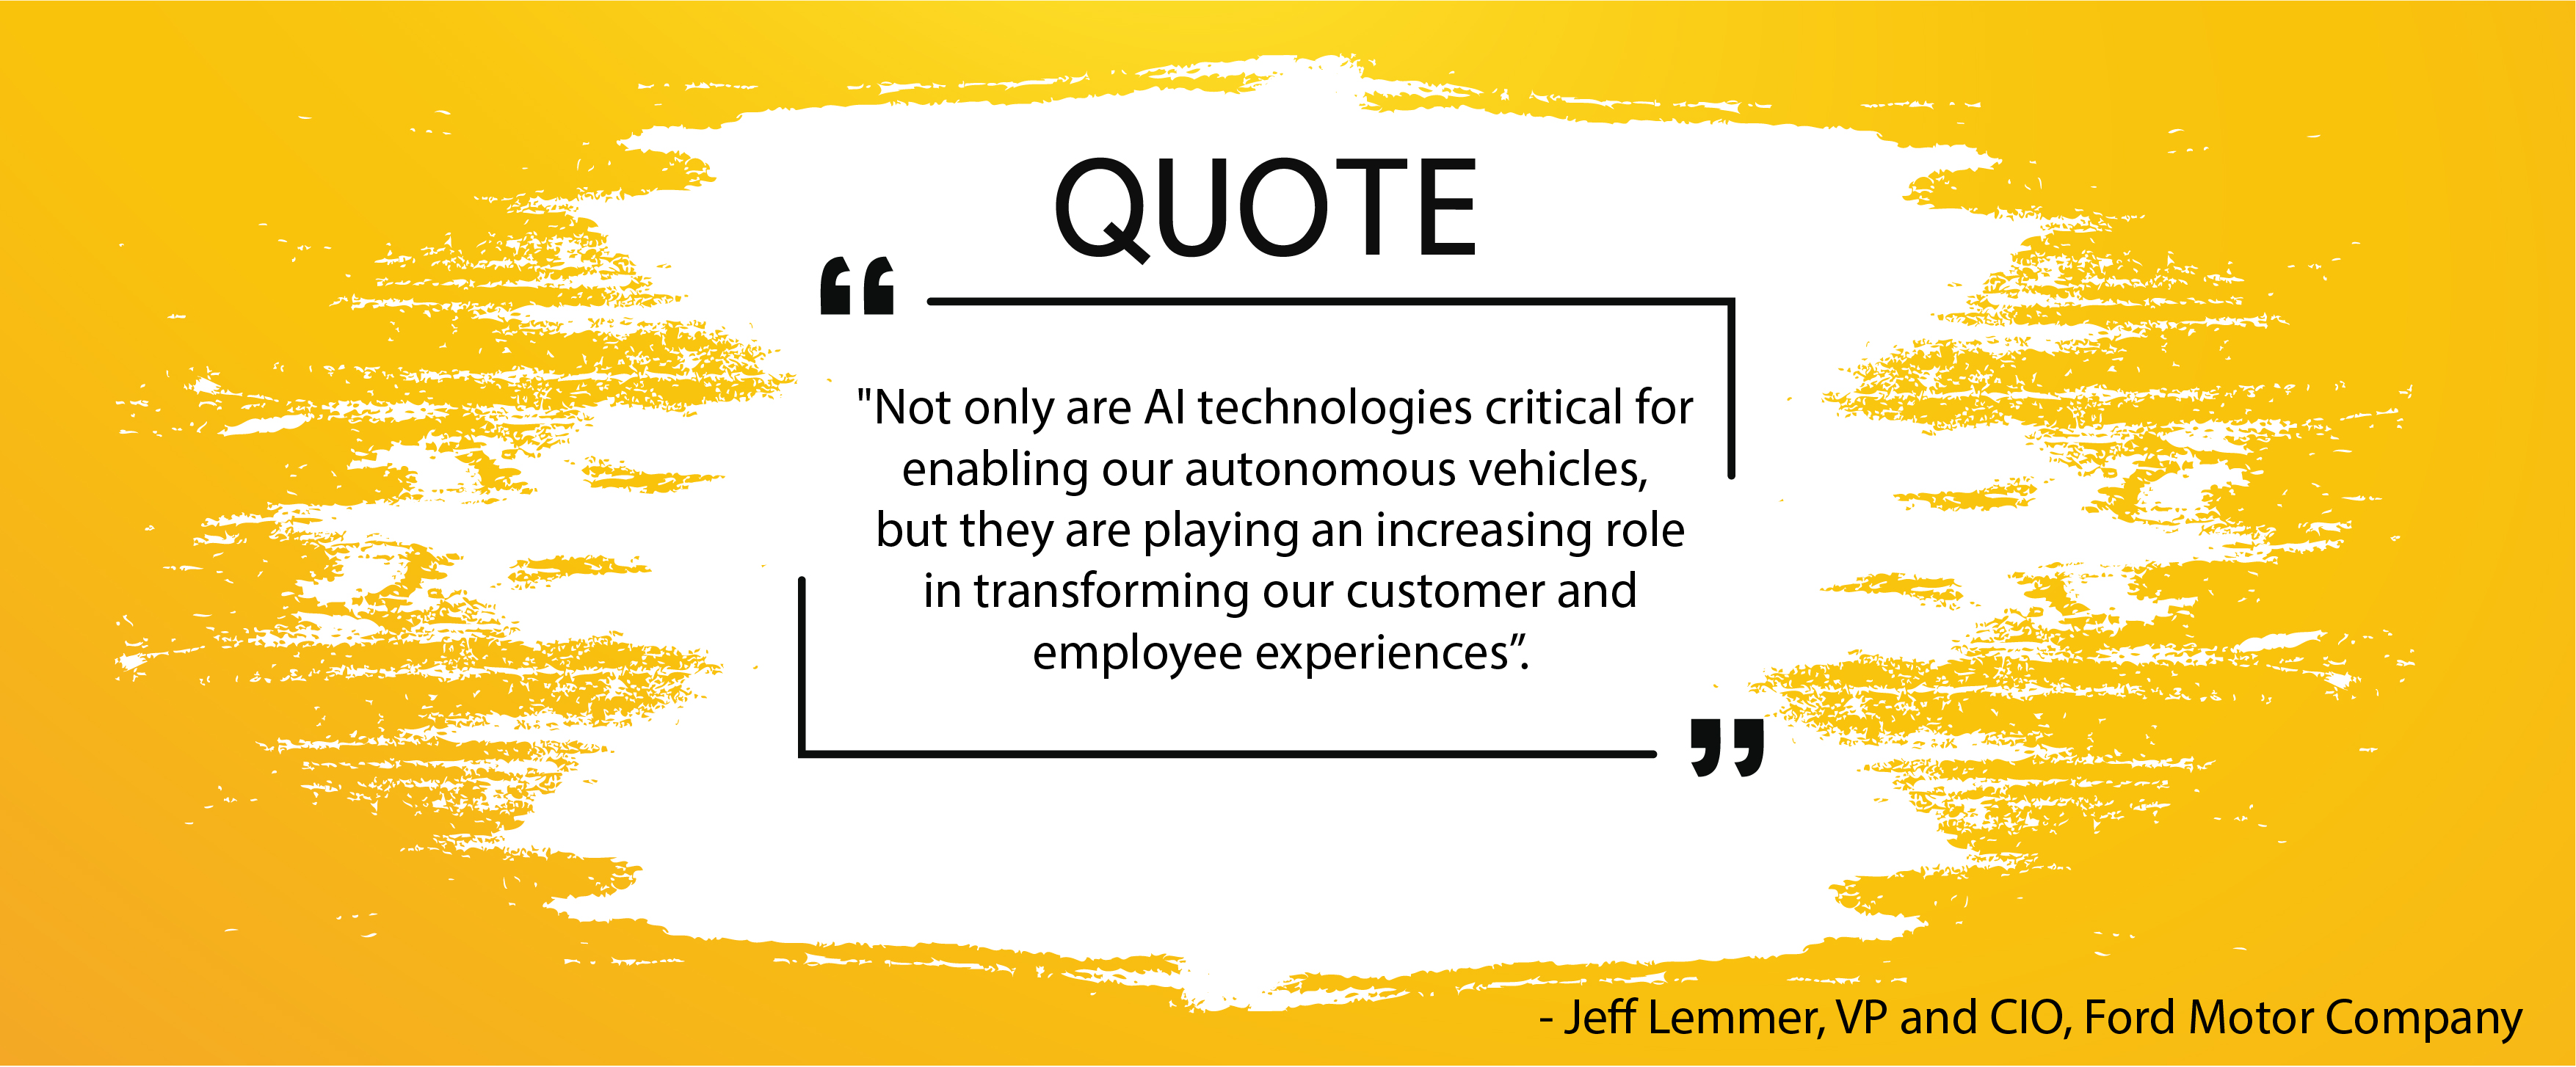 A quote graphics reads, 'Not only are AI technologies critical for enabling our autonomous vehicles, but they are playing an increasing roles in transforming our customer employee experiences.'